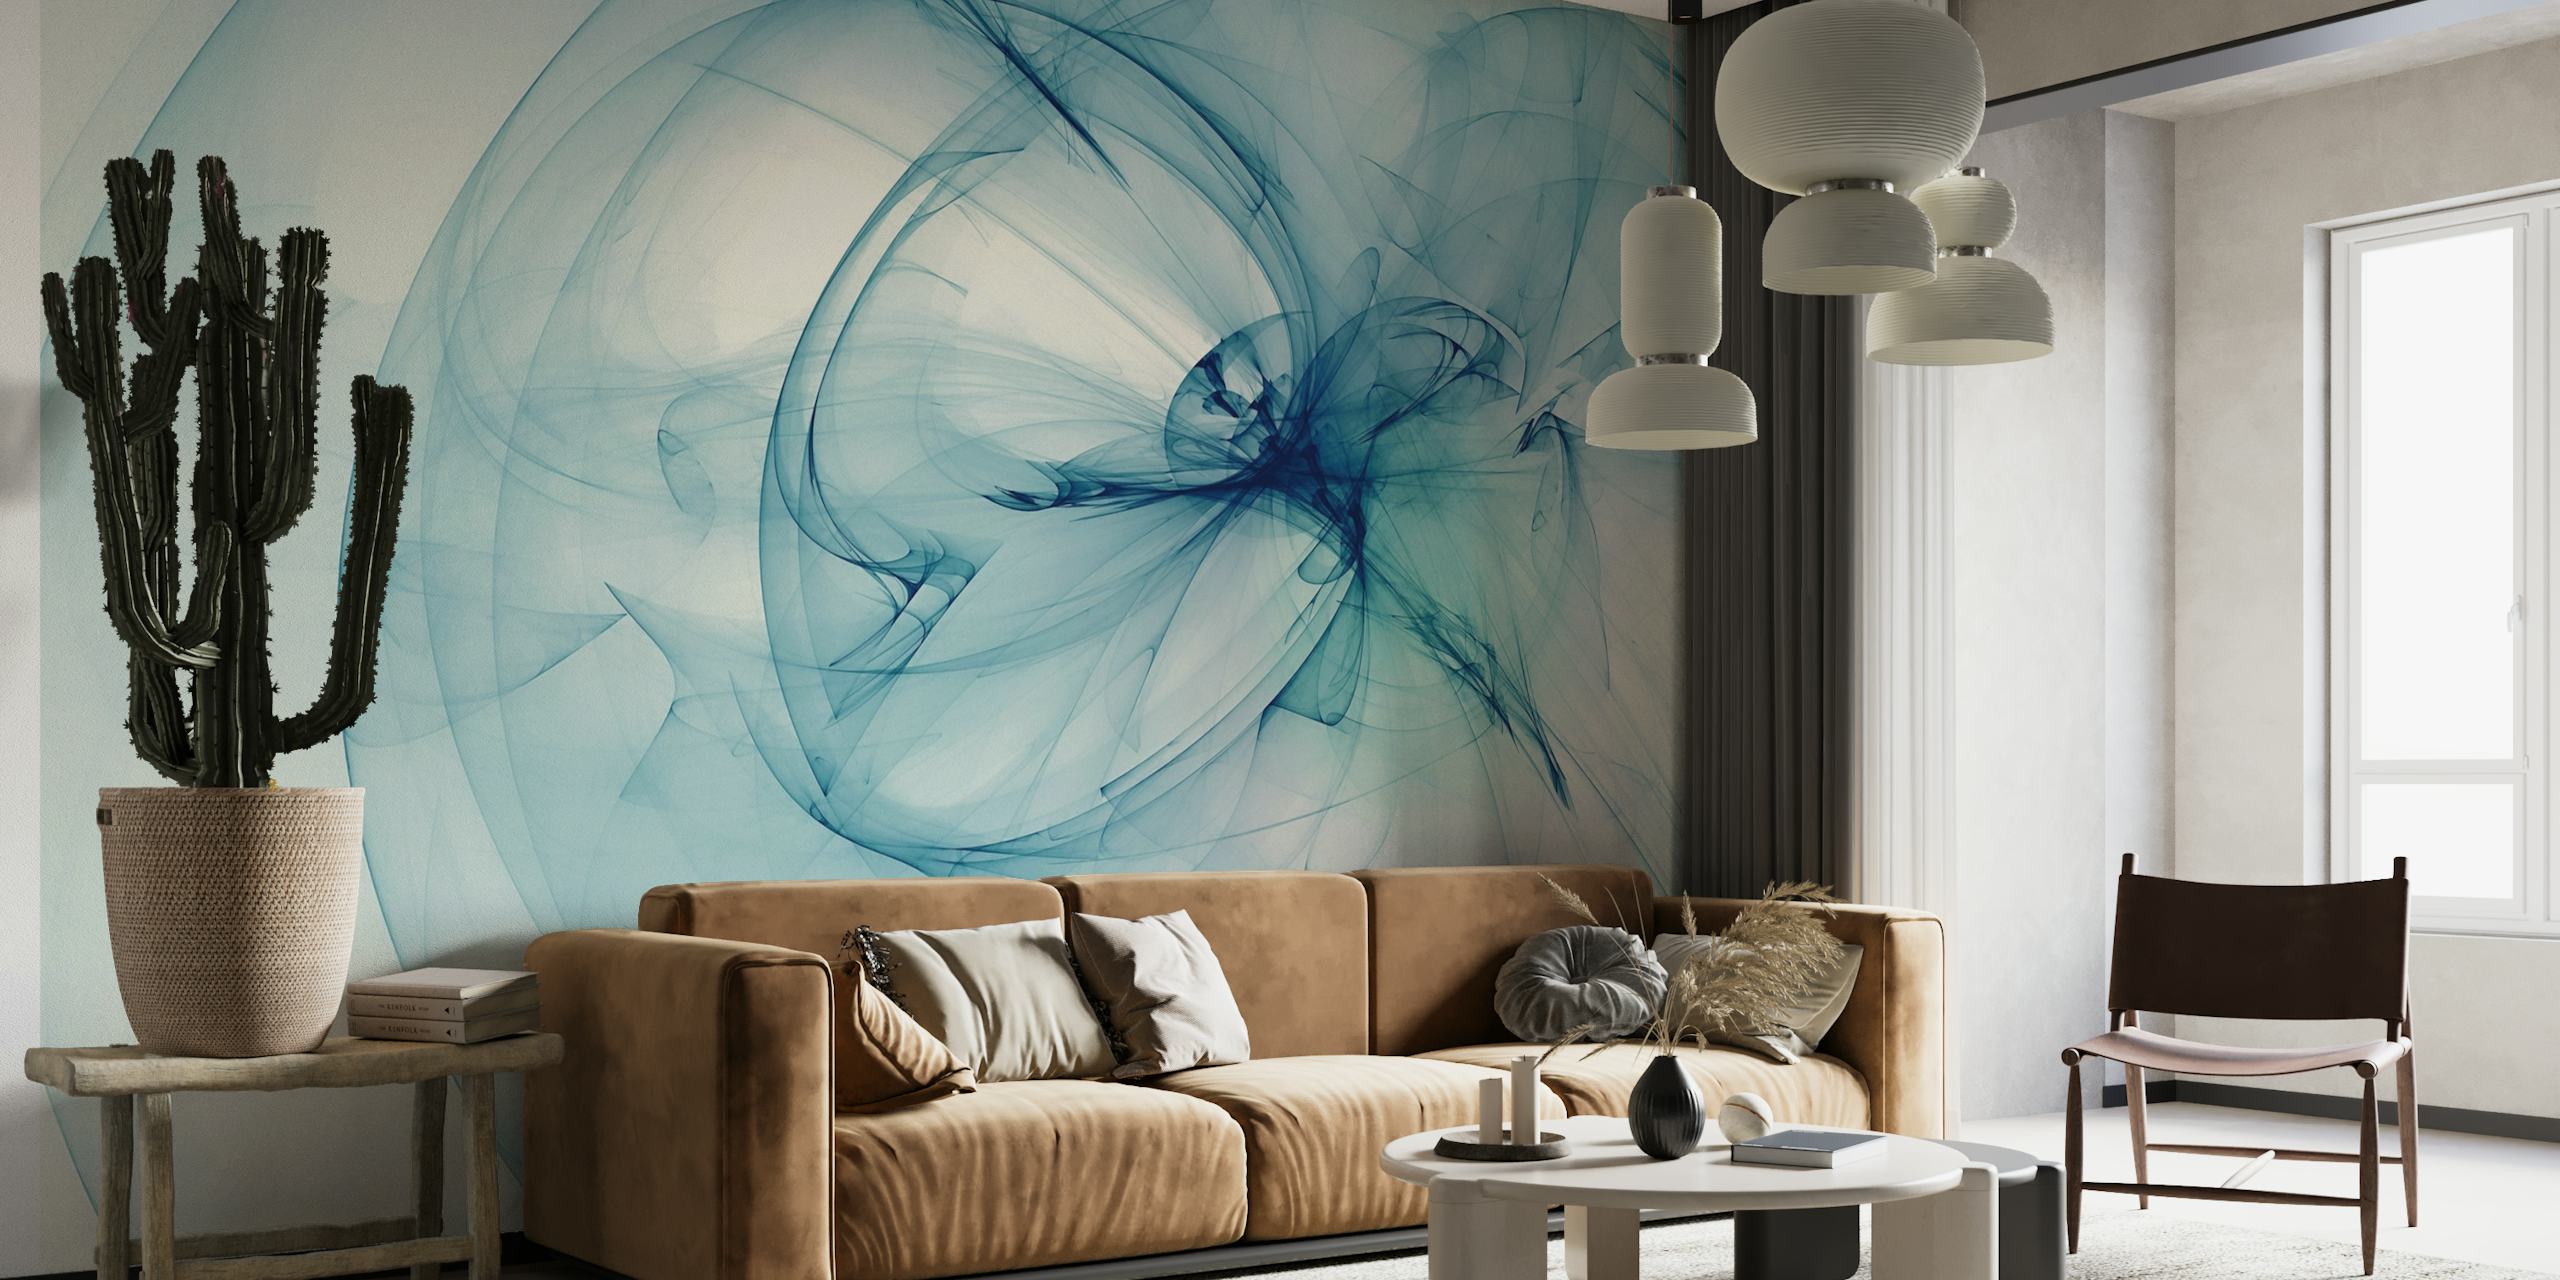 Abstract light blue smoke-like wall mural design conveying serenity and elegance